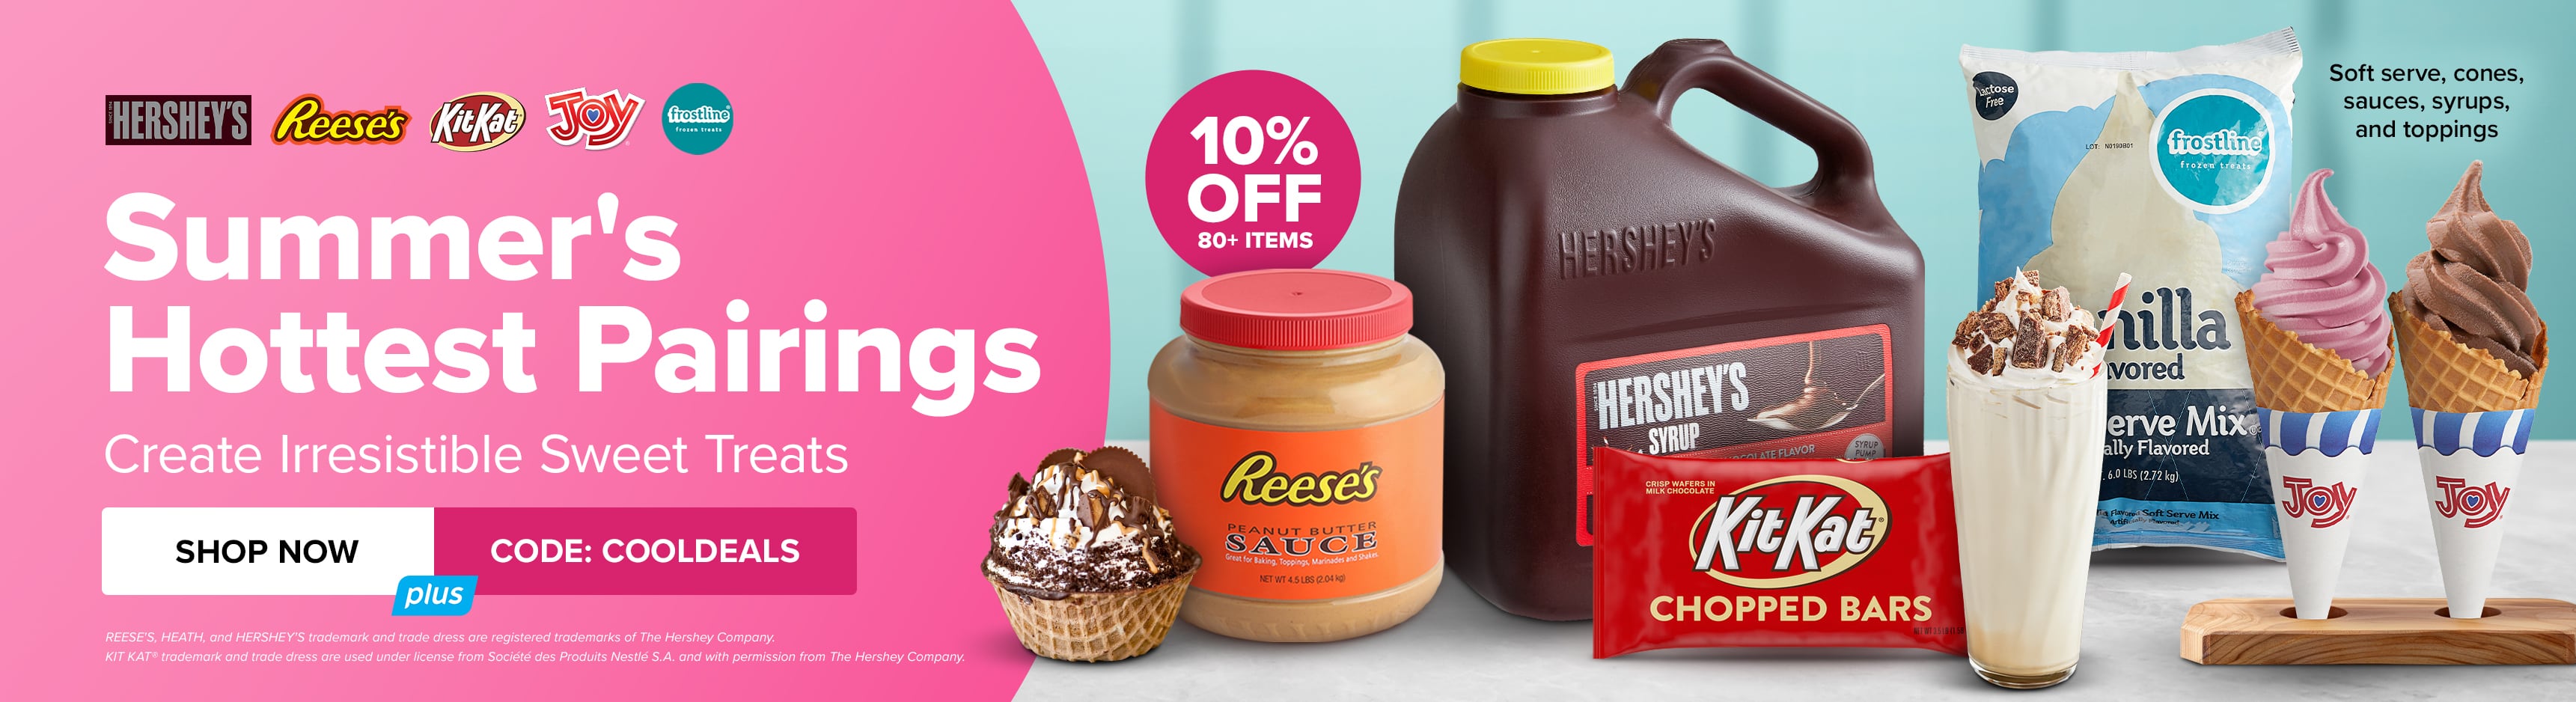 Summer’s Hottest Pairings. Create Irresistible Sweet Treats. Shop Now. Use Code: COOLDEALS. Save 10% On 90+ Items.